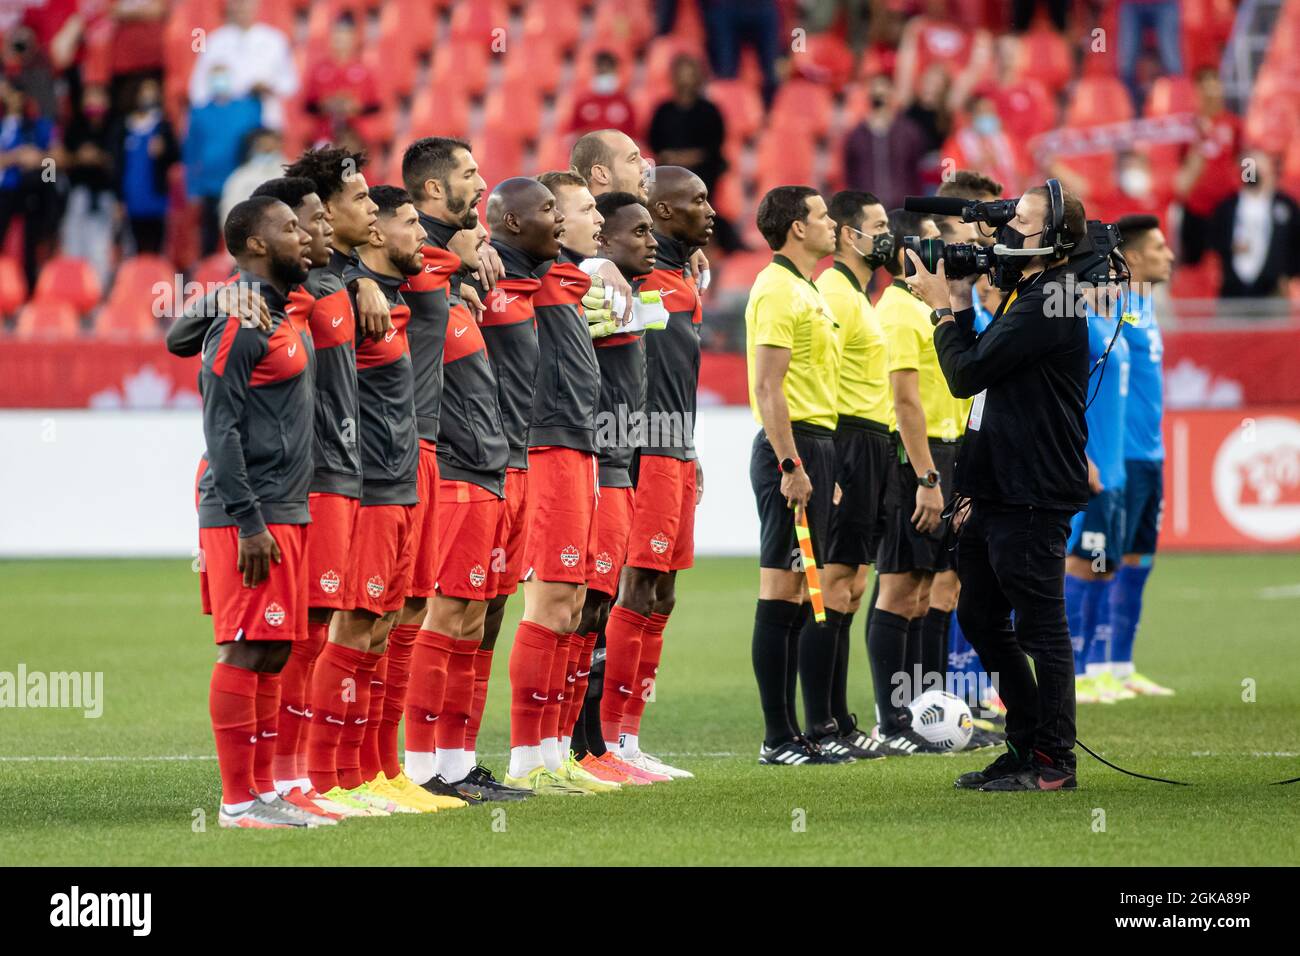 Toronto, Canada, September 8, 2021: Team Canada (red/grey) opening line up during CONCACAF World Cup Qualifying 2022 at BMO Field in Toronto, Canada Stock Photo